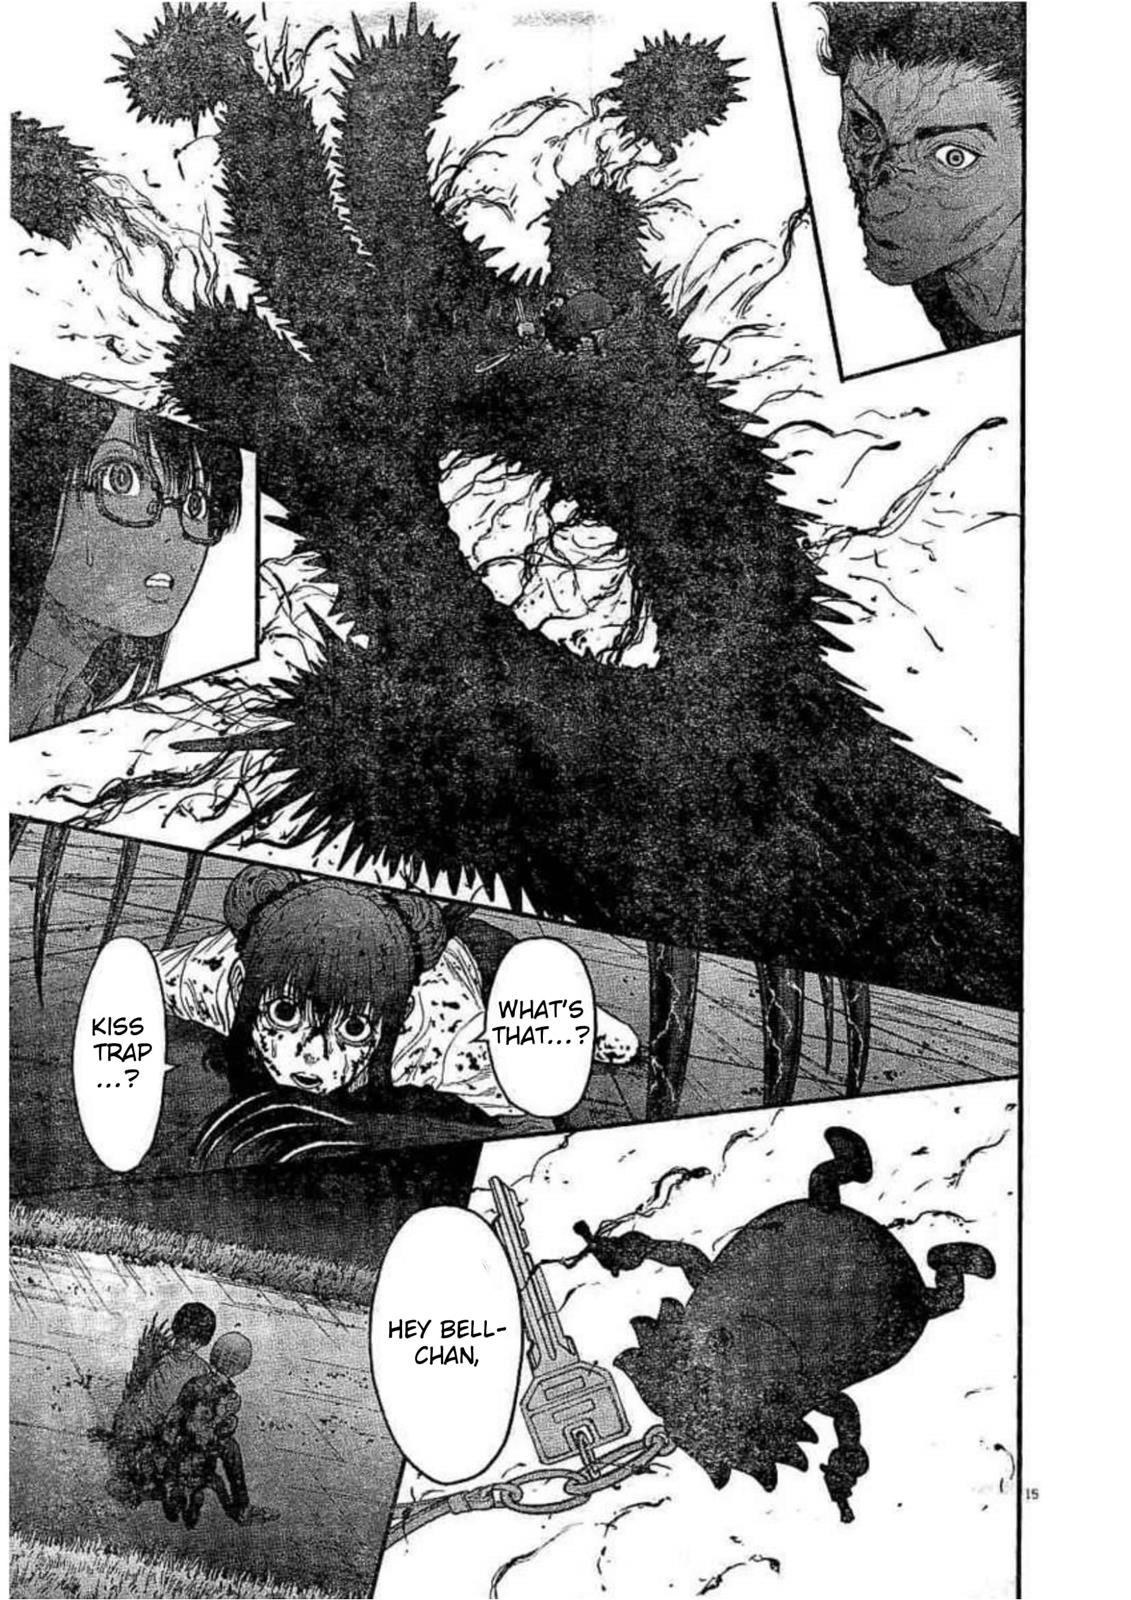  Chapter 30 image 016